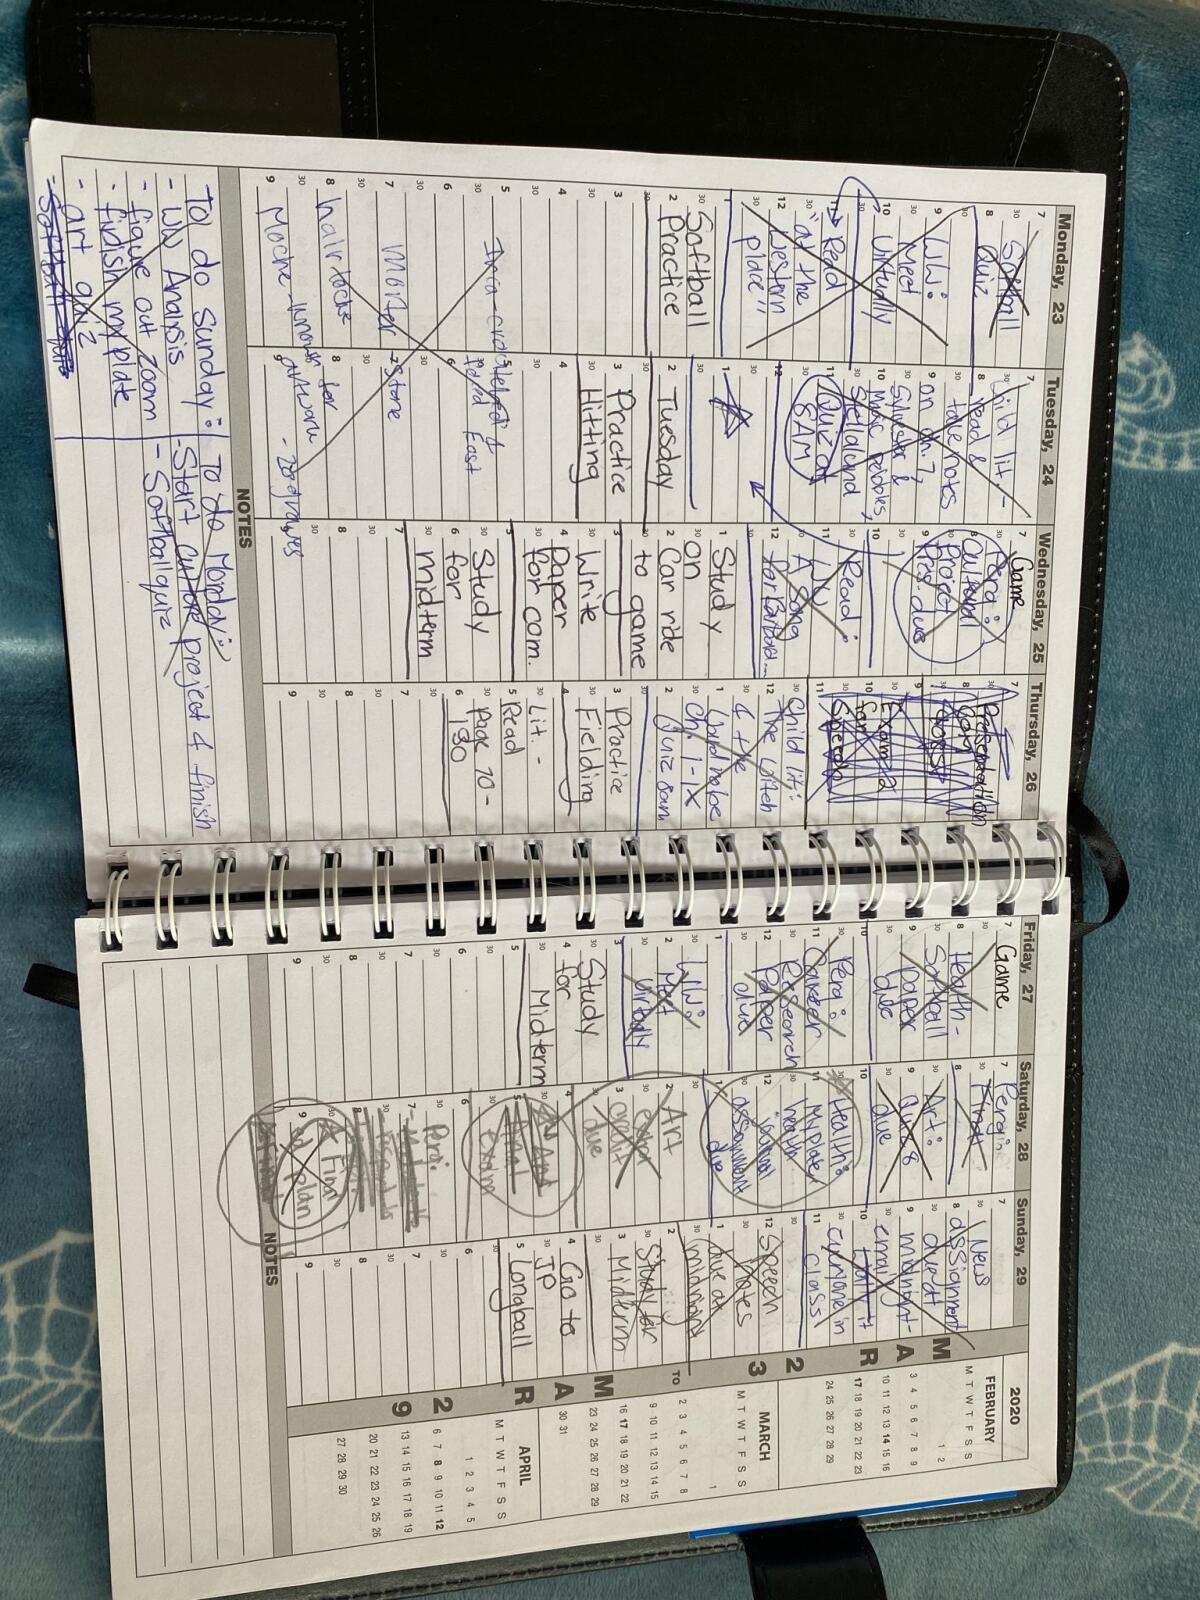 Savannah Ames' planner is full to keep track of her 24 units and softball events.